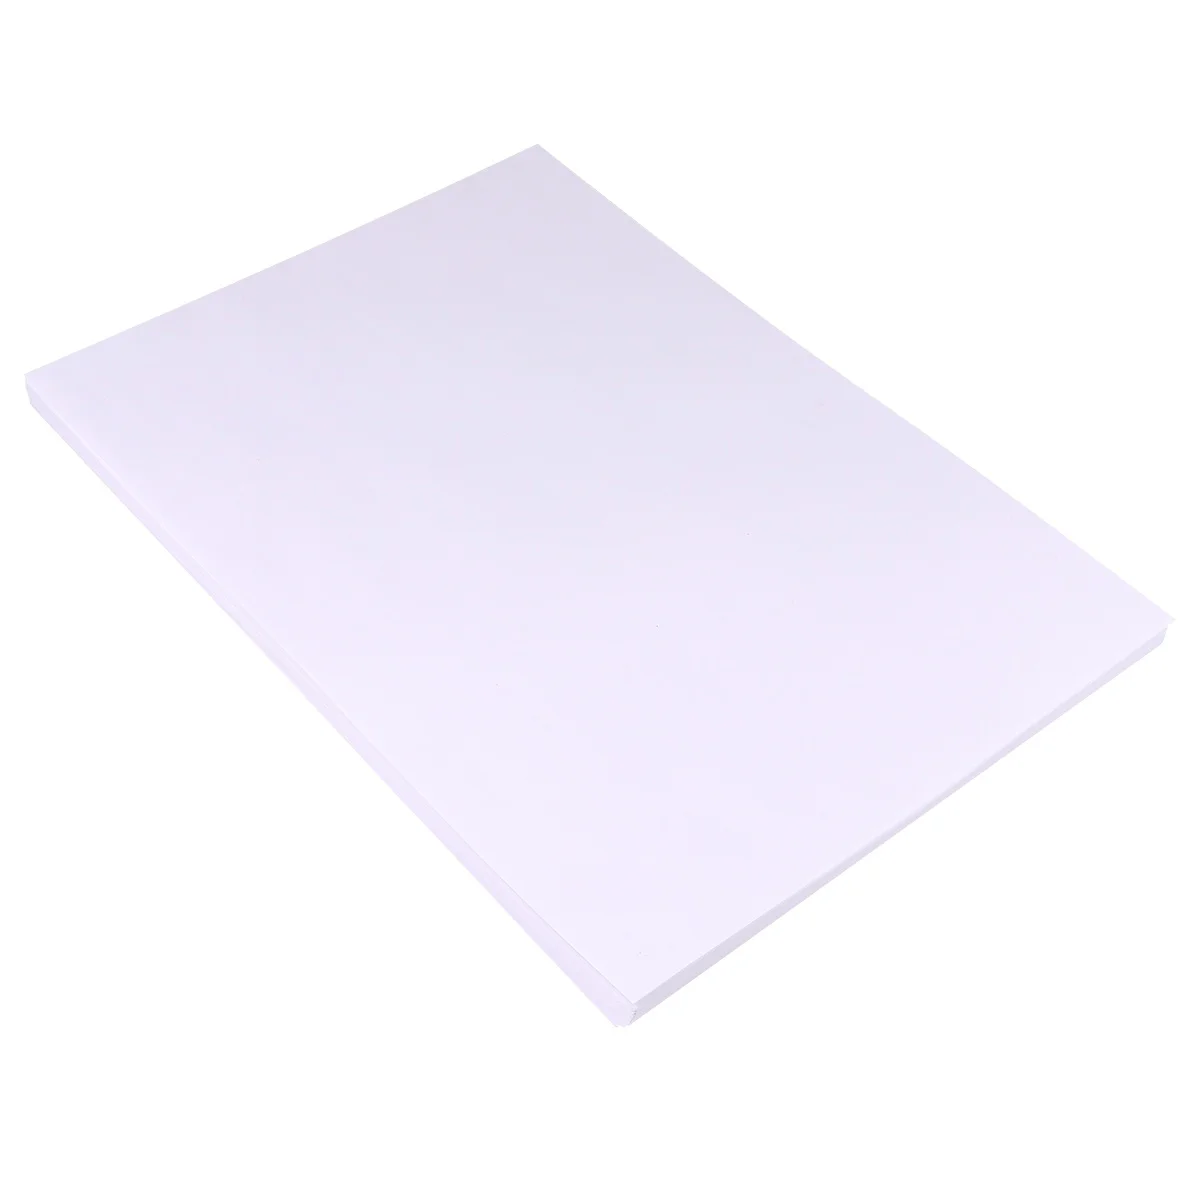 

100 Sheets Double Sided Label Stickers Scrapbook Matte White Paper Anti-adhesive Blank Separation